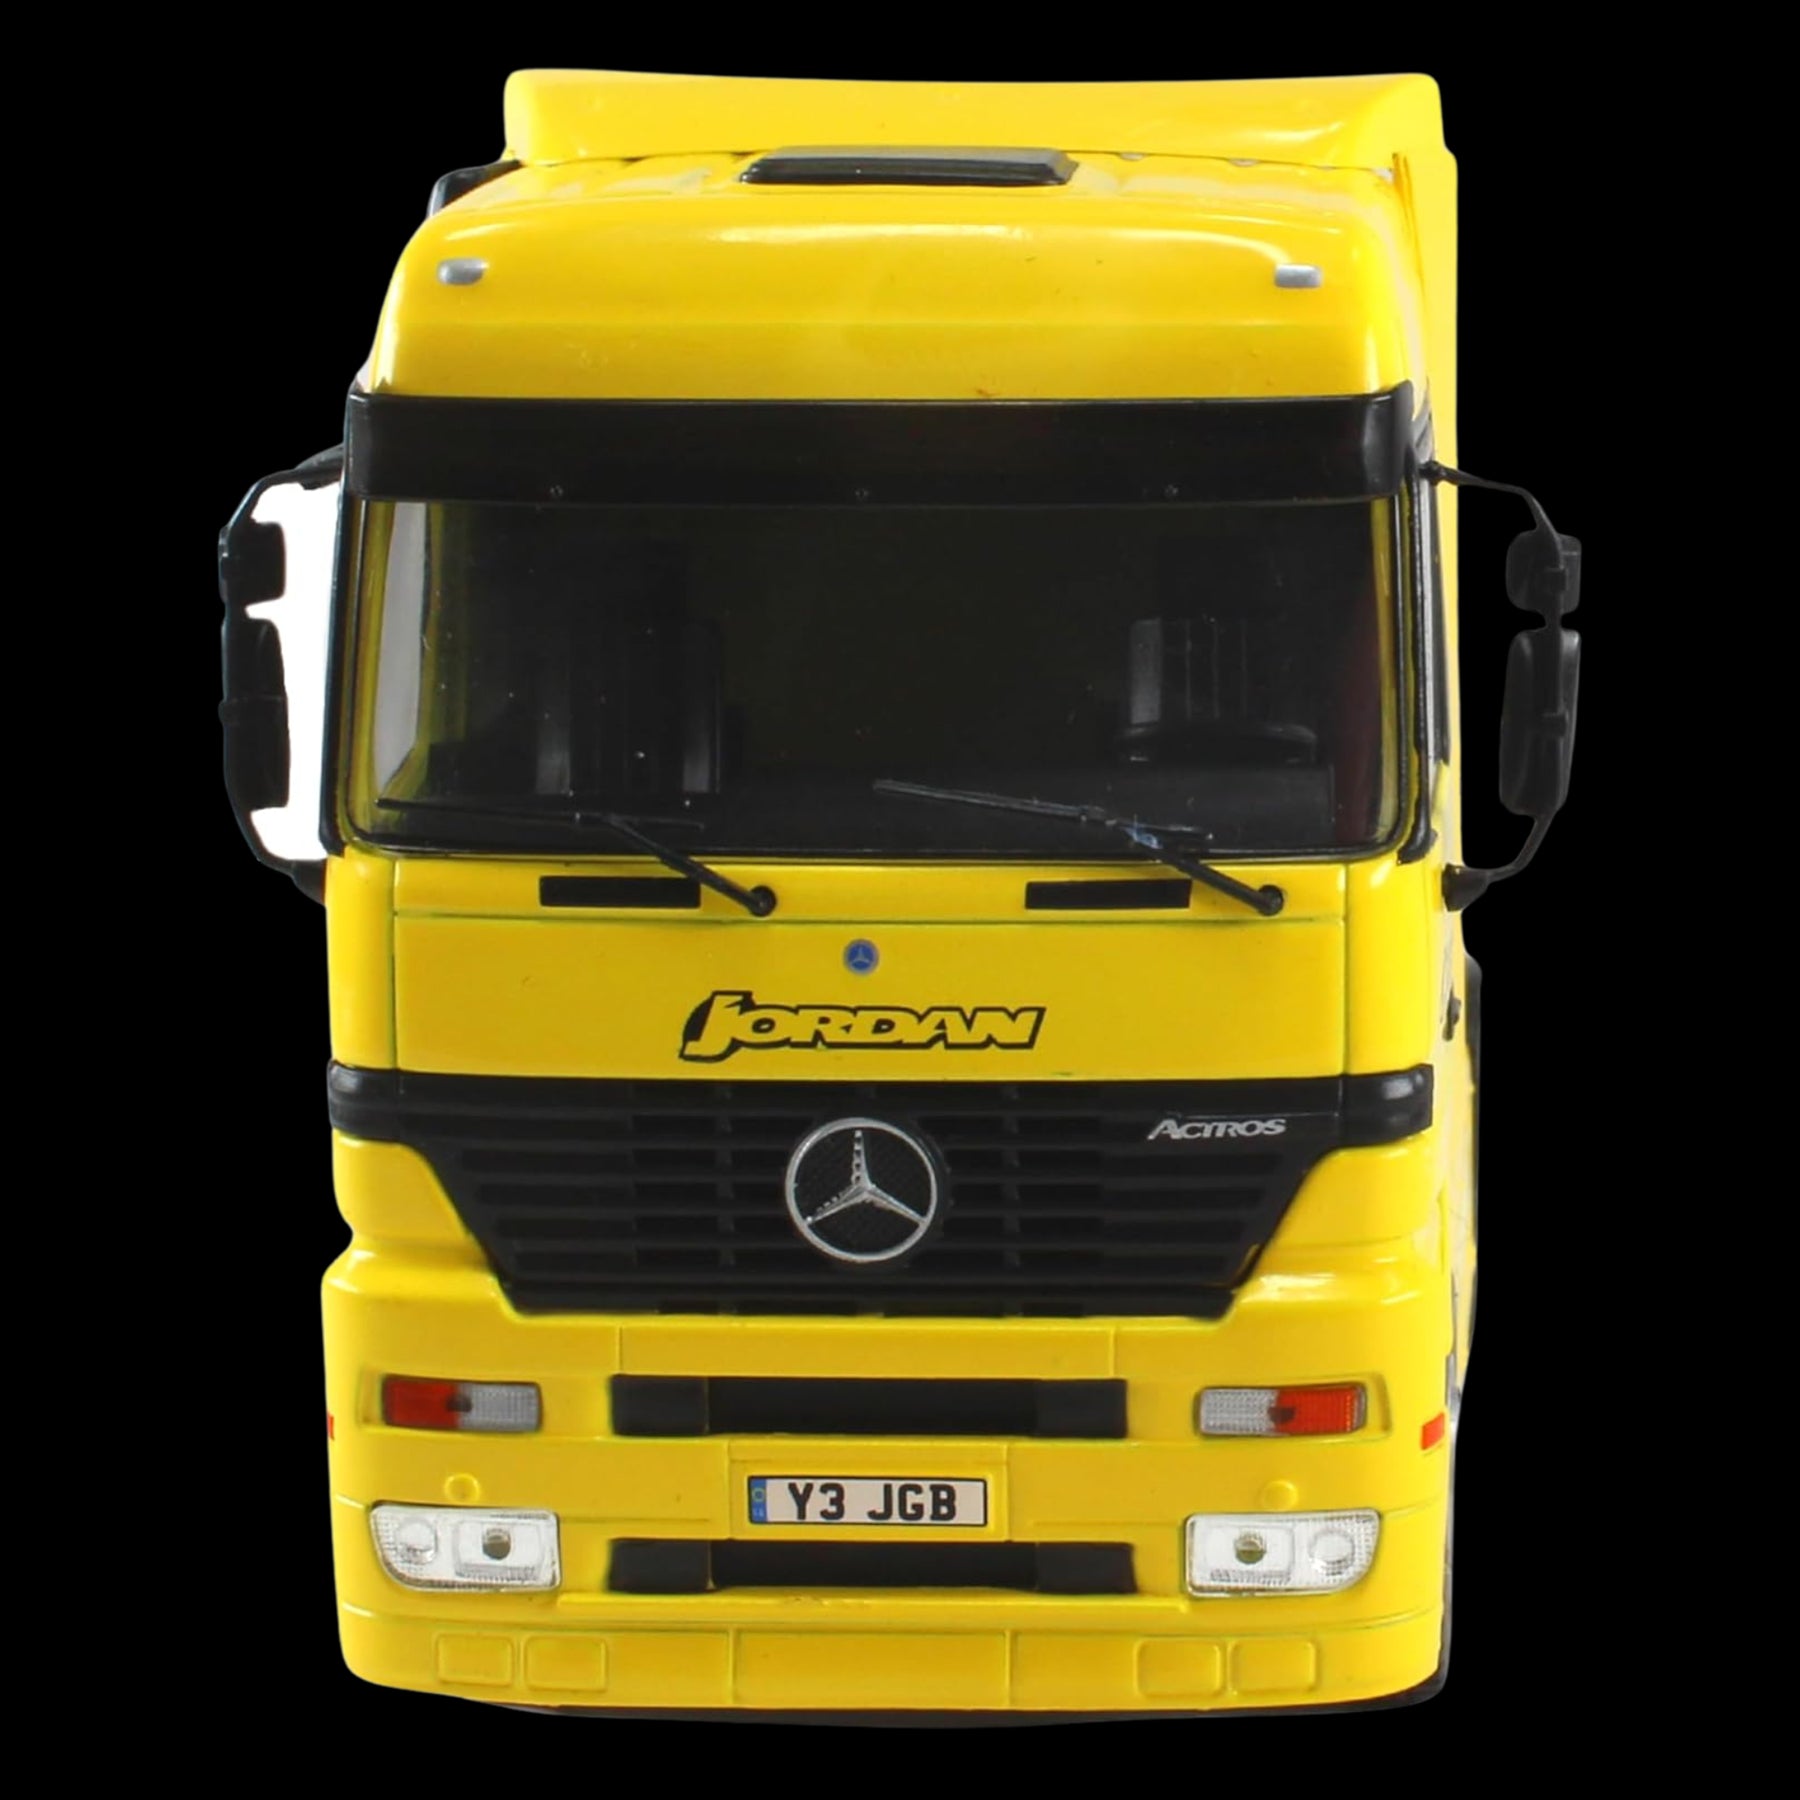 F1 Formula 1 - Centauria 1:43 Scale Large Diecast Articulated HGV Lorry & Trailer - Jordan Mercedes Actros Official Team Transport - 36cm in Length - Toptoys2u